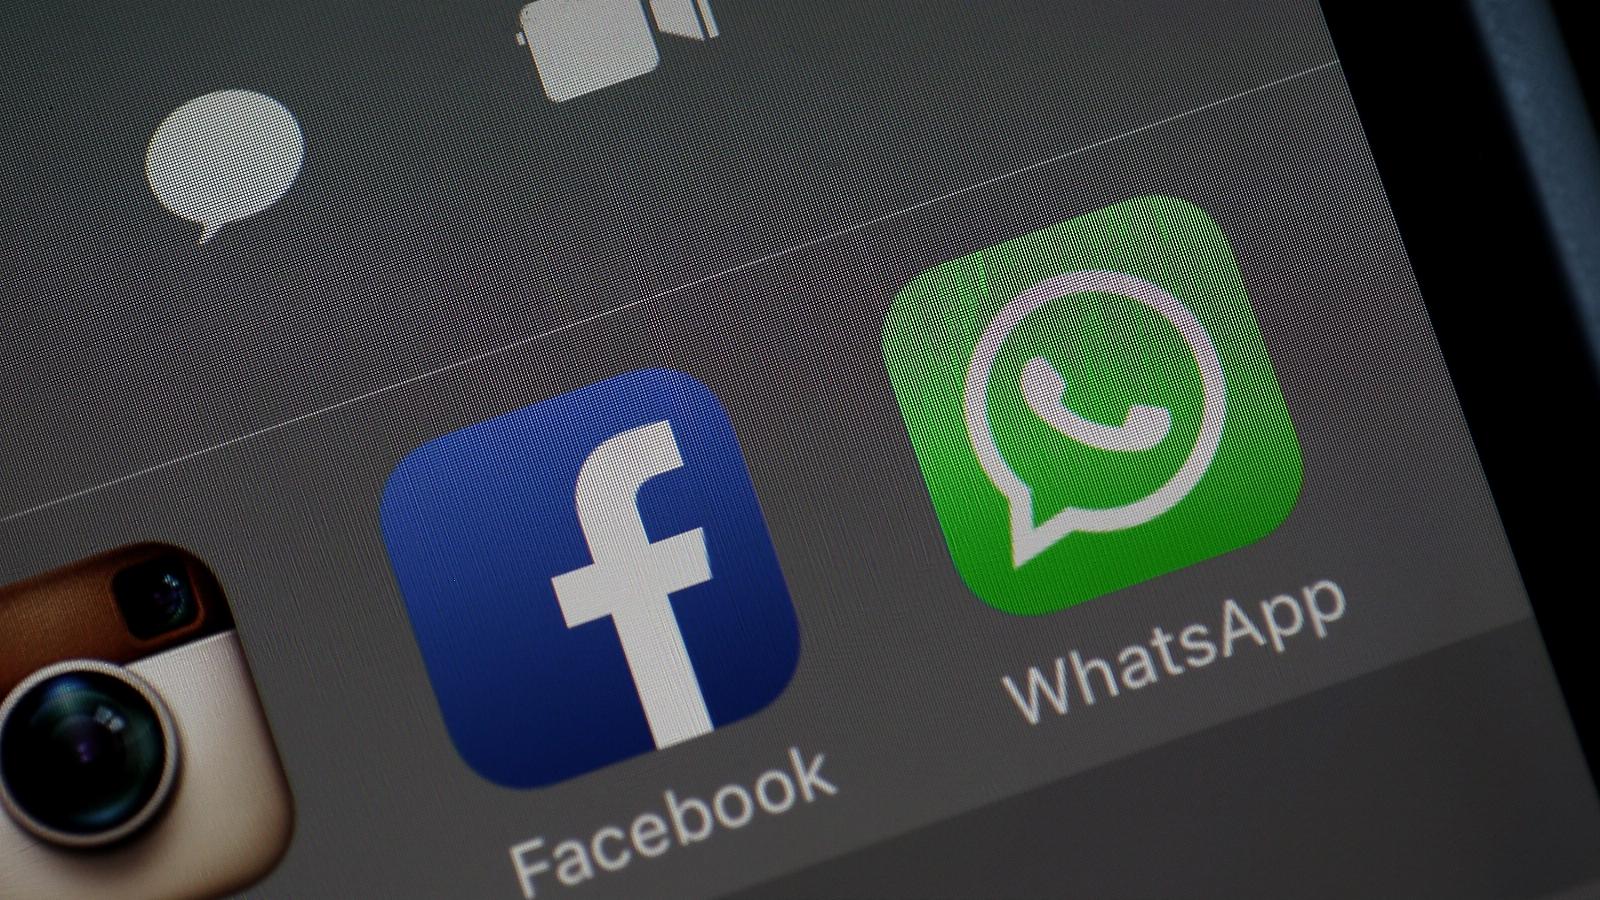 To comply with DMA, WhatsApp and Messenger will become interoperable via Signal protocol